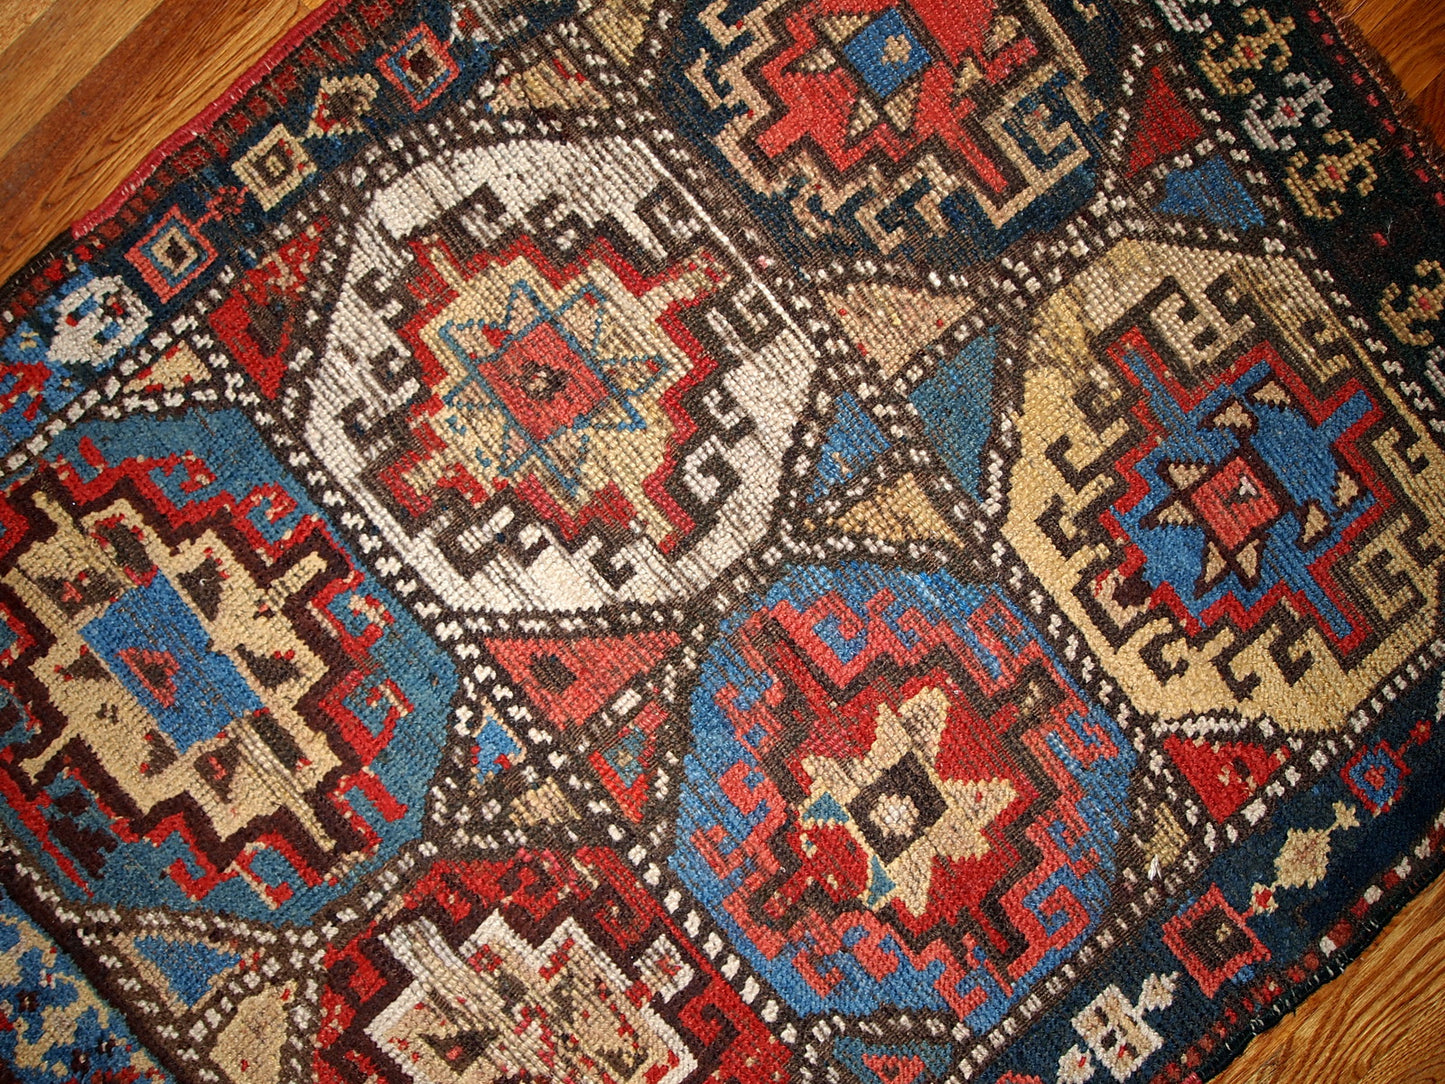 Antique collectible Kurdish rug in colorful shades and tribal ornaments. The rug is in a good shape for it's age, has some age wear. 